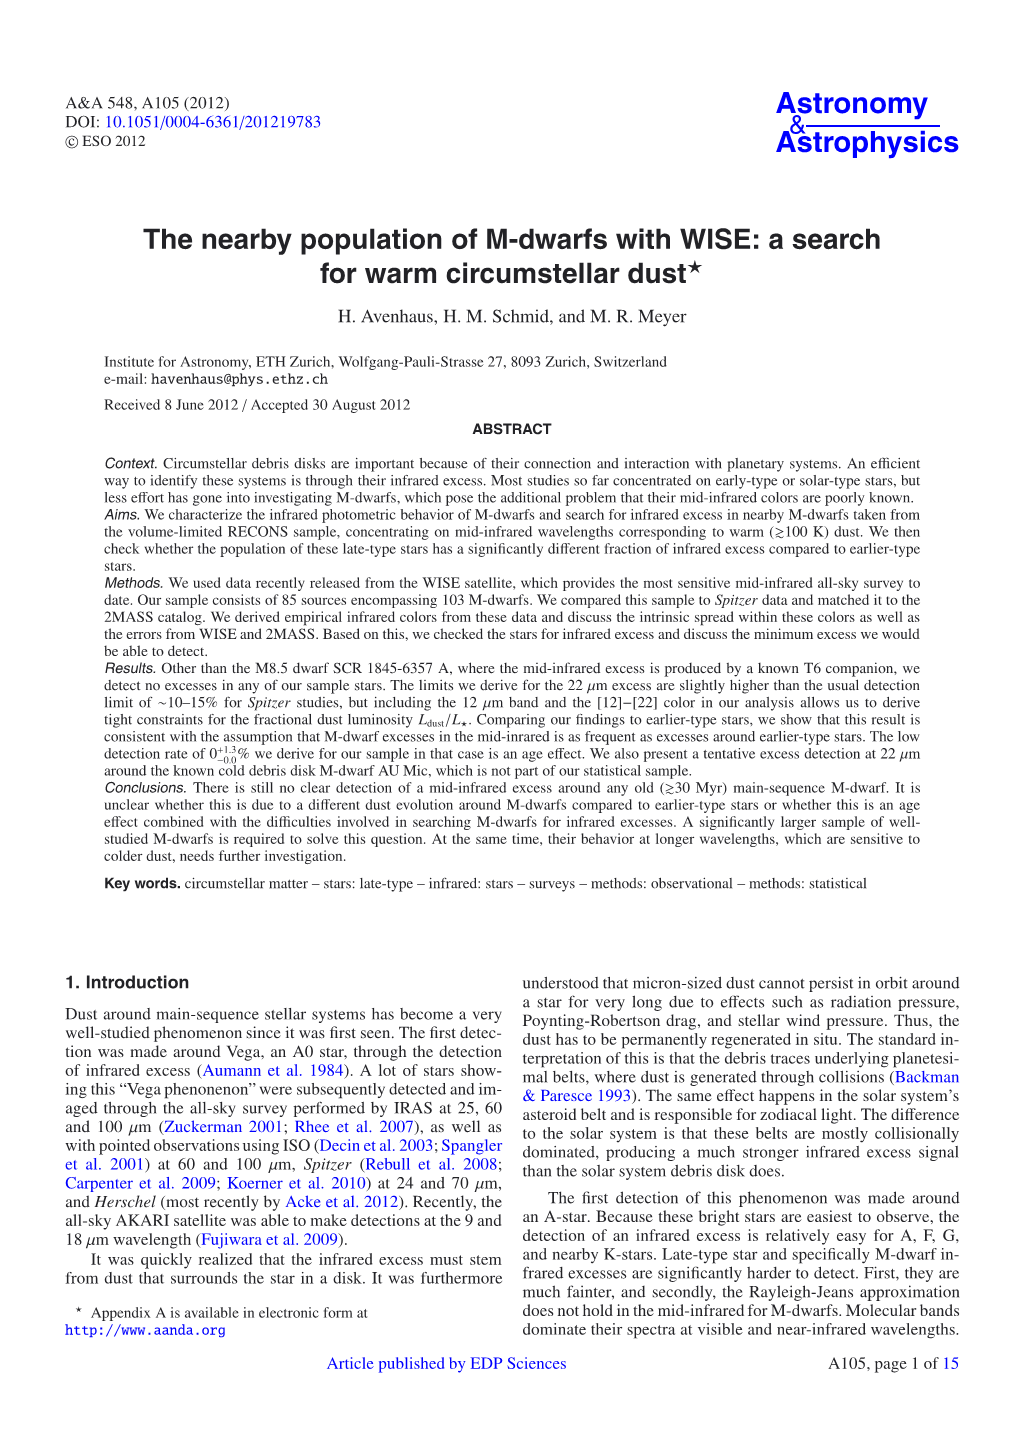 The Nearby Population of M-Dwarfs with WISE: a Search for Warm Circumstellar Dust